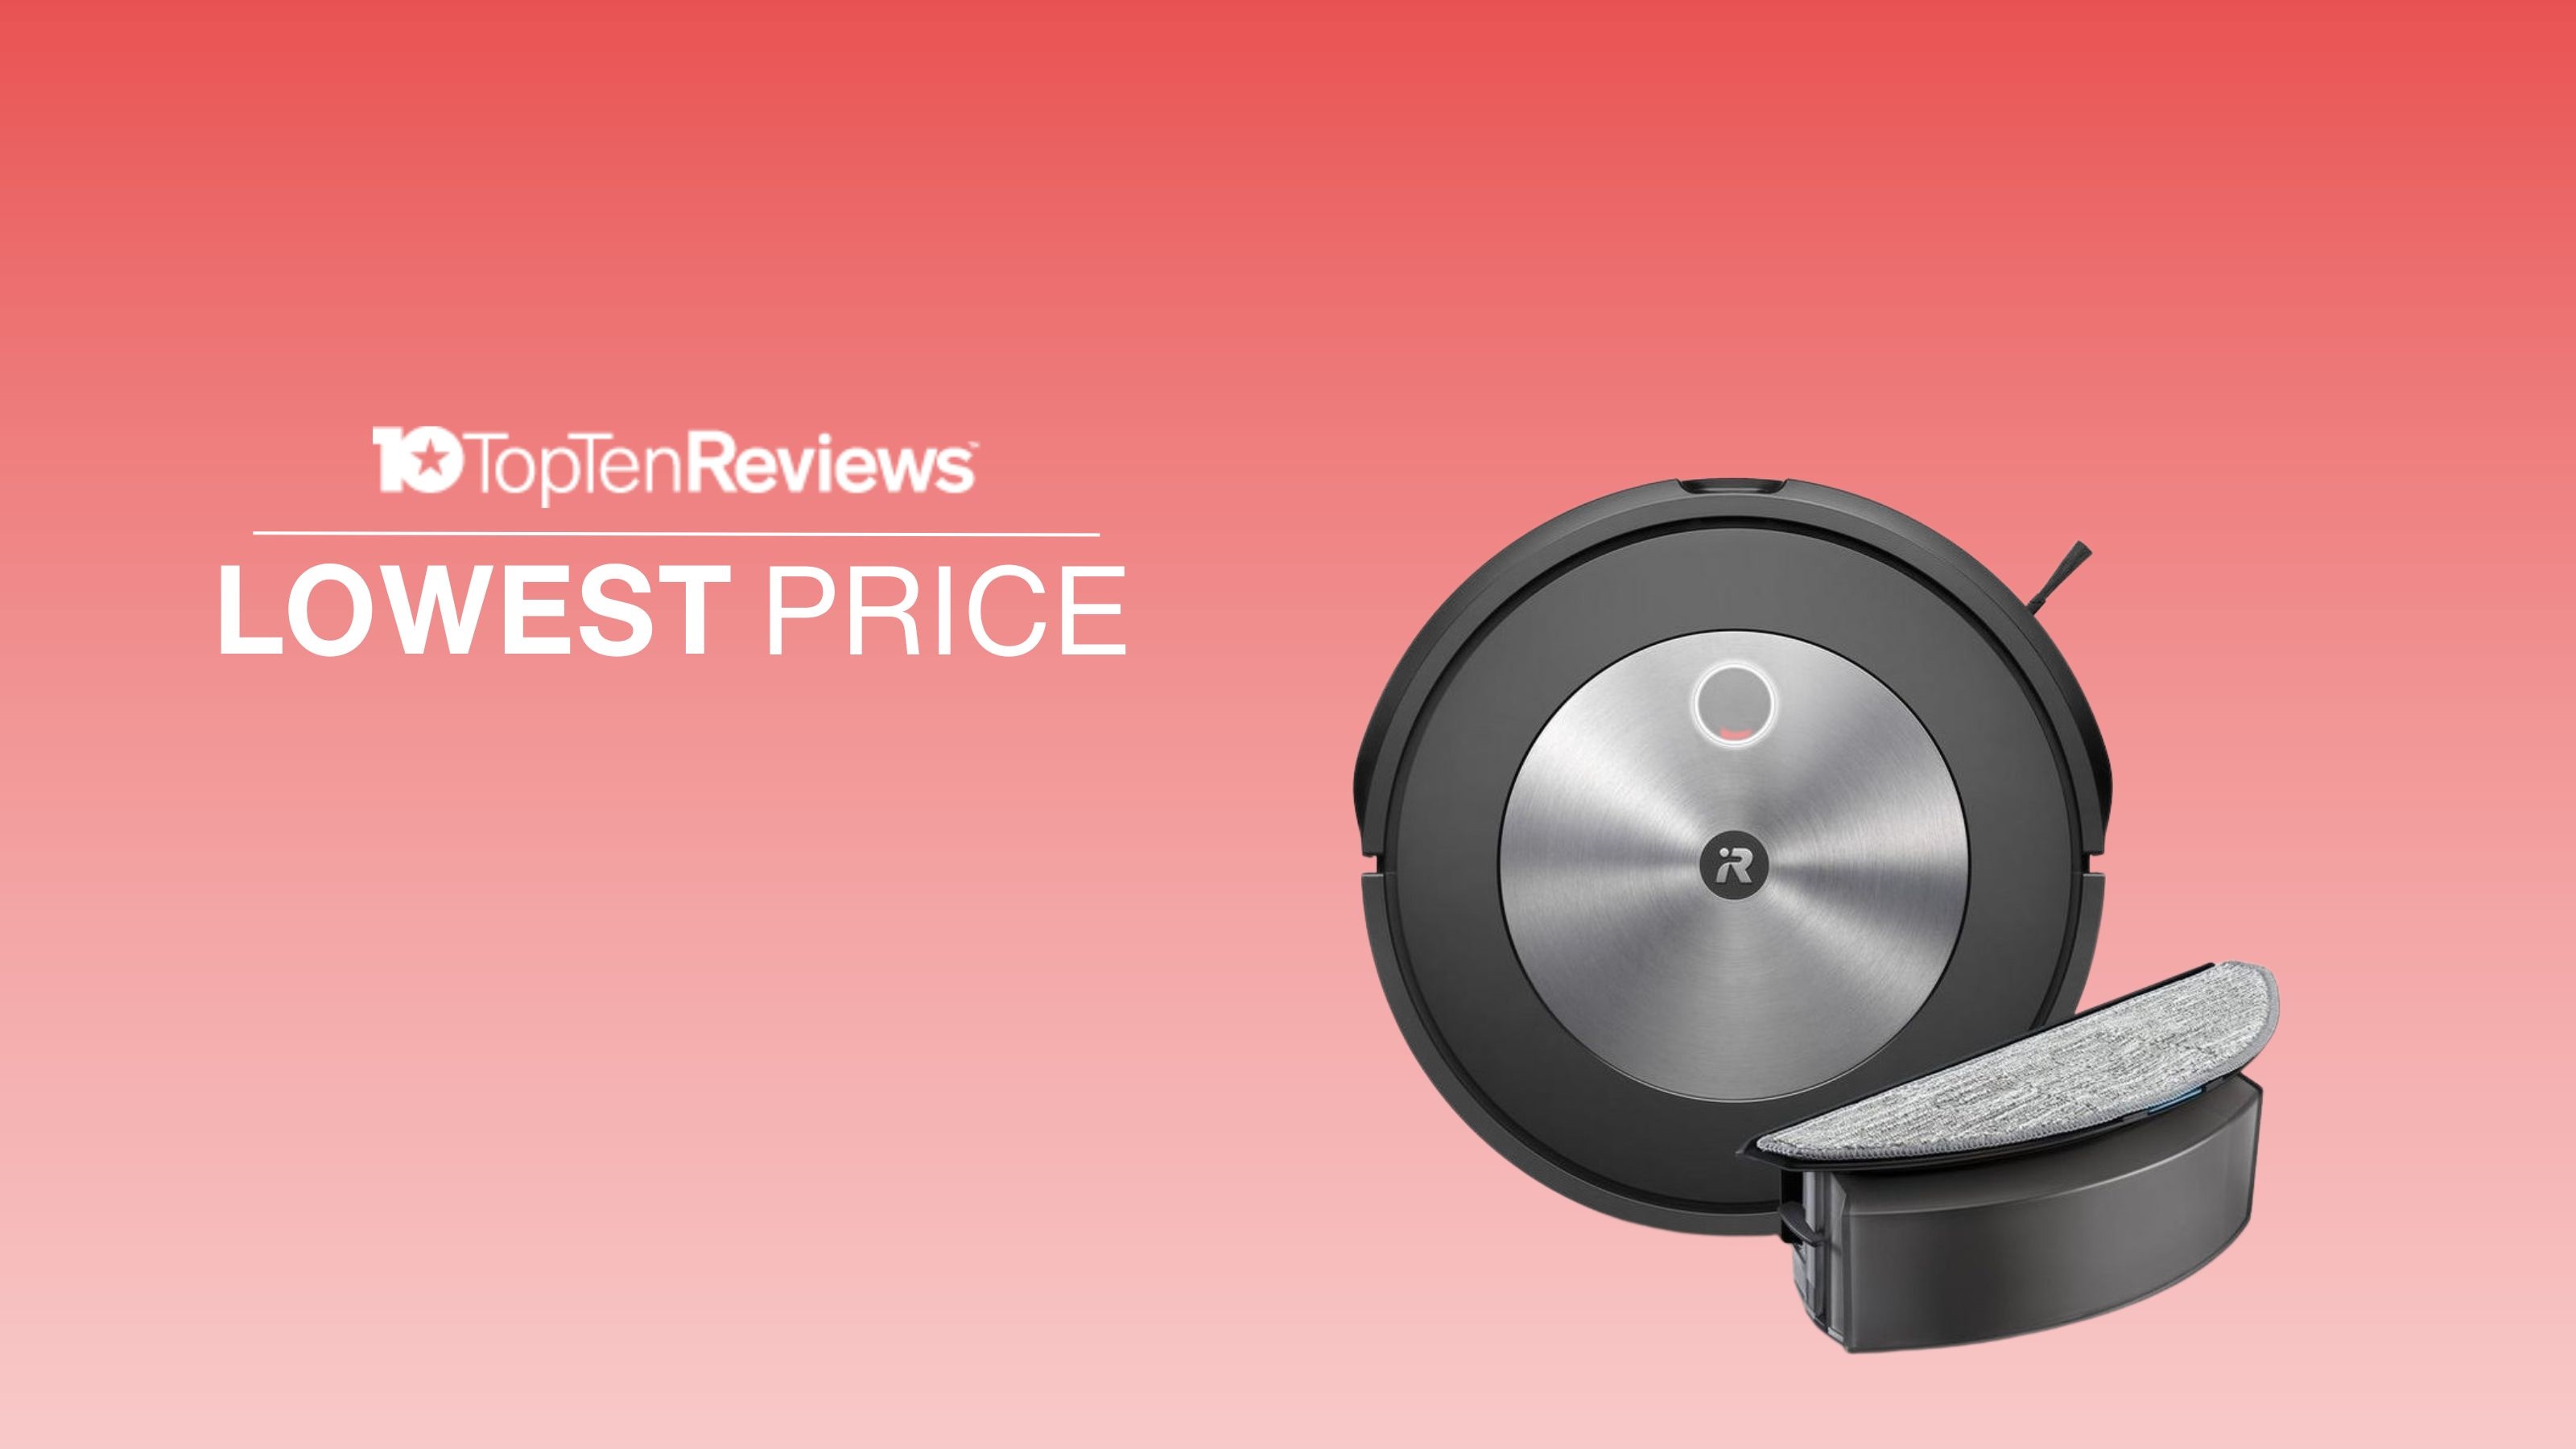 Roomba J5+ robot vacuum gets it's first price drop for Black